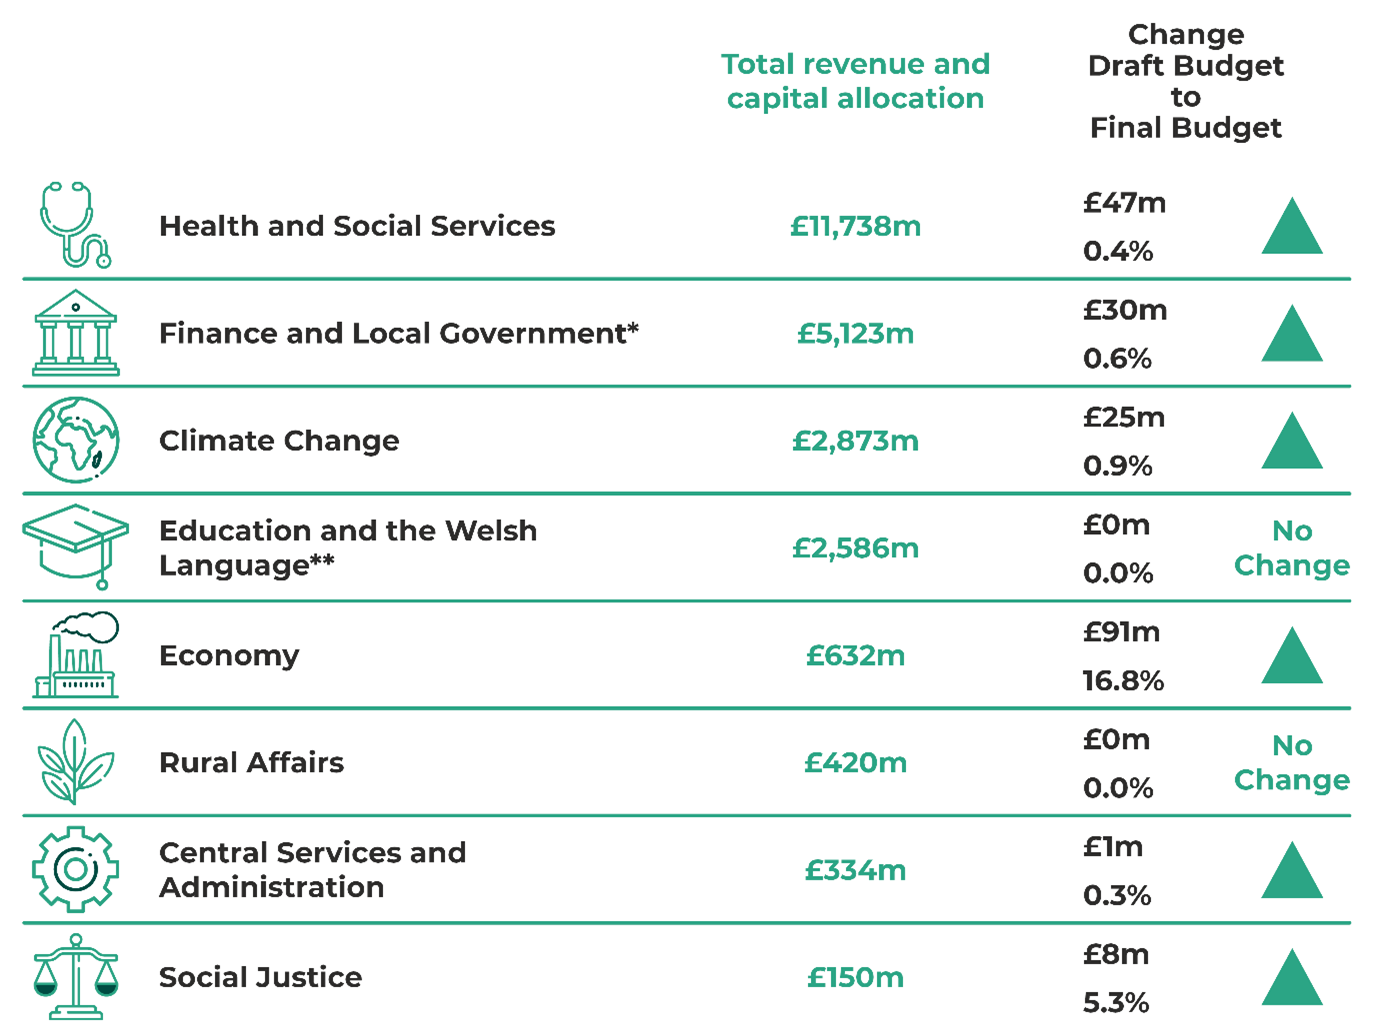 Final Budget revenue and capital by portfolio and changes from the Draft Budget. Health and Social Services £11,738m, up £47m (0.4%). Finance and Local Government £5,123m, up £30m (0.6%). Climate Change £2,873m, up £25m (0.9%). Education and the Welsh Language £2,586m, no change. Economy £632m, up £91m (16.8%). Rural Affairs £420m, no change. Central Services and Administration £334m, up £1m (0.3%). Social Justice £150m, up £8m (5.3%).